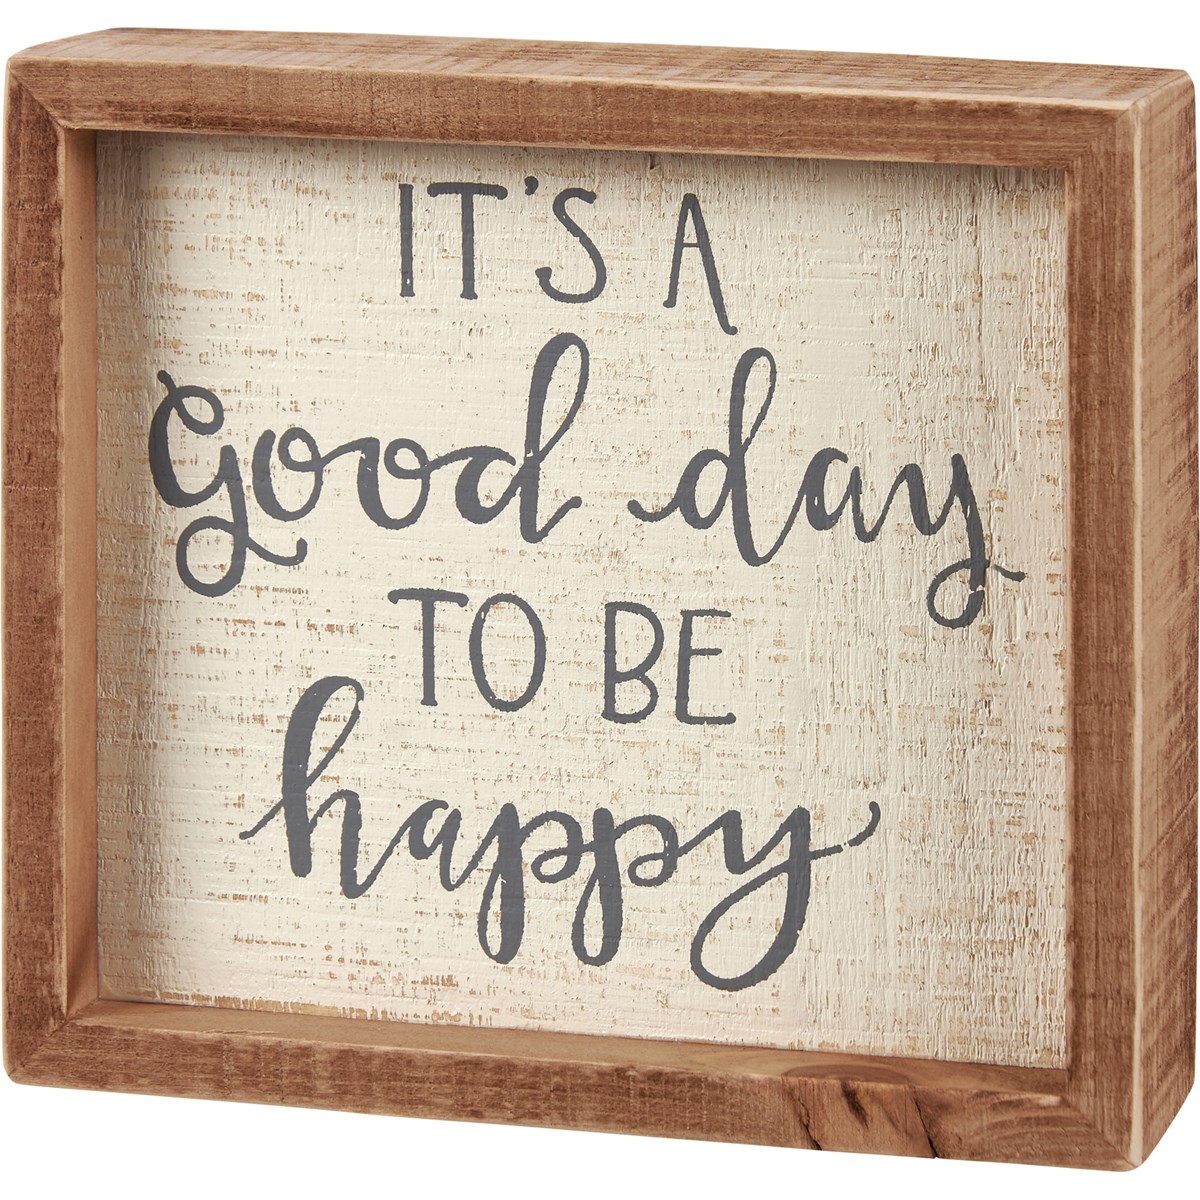 Good Day To Be Happy Inset Box Sign - Wood